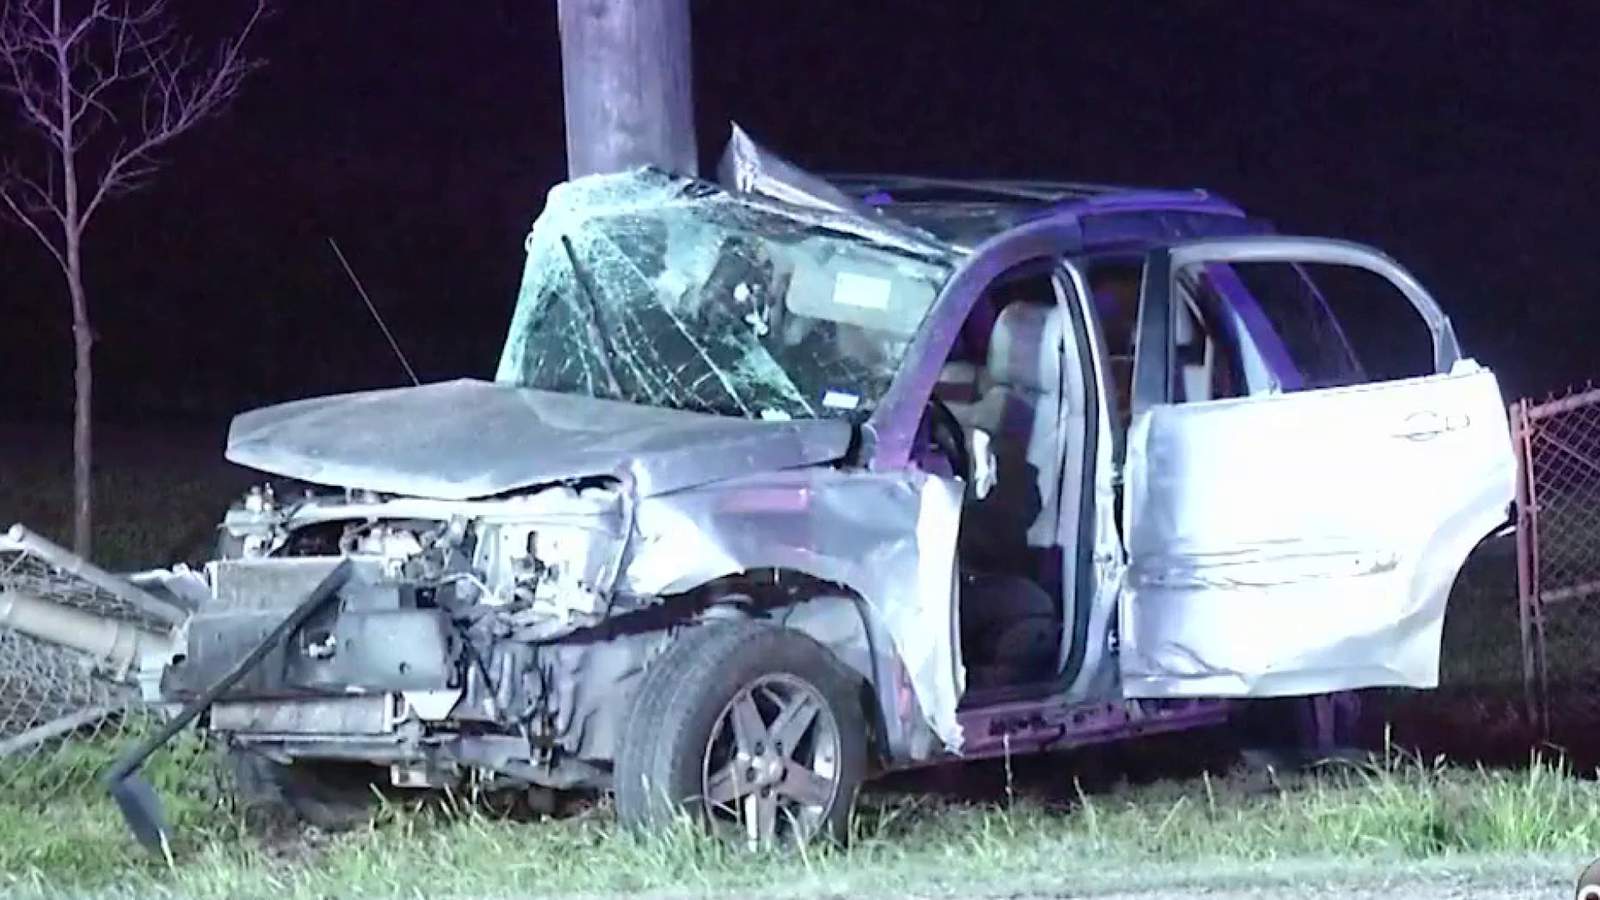 Driver extracted from vehicle, hospitalized after crashing into utility pole, BCSO says